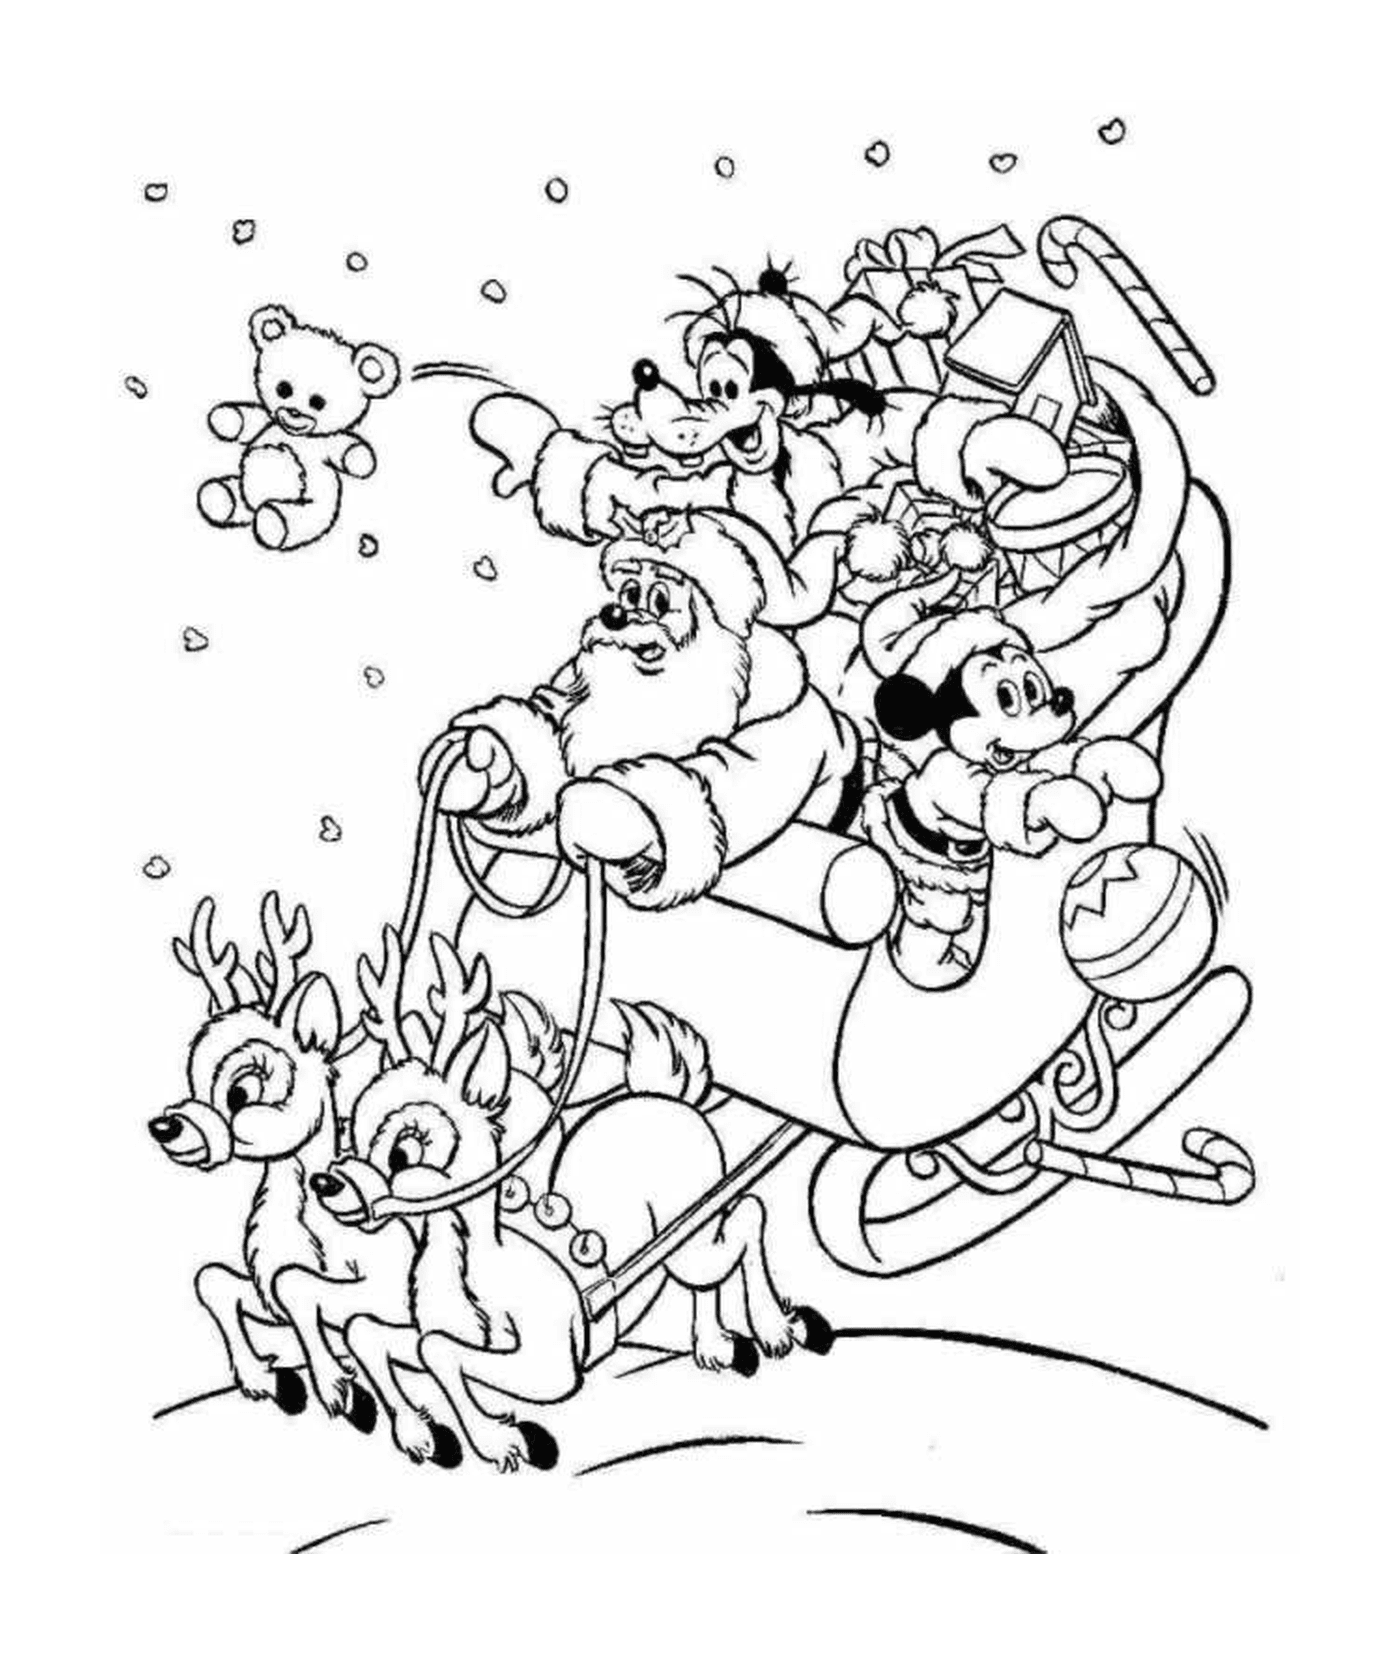  a group of people in a sled 